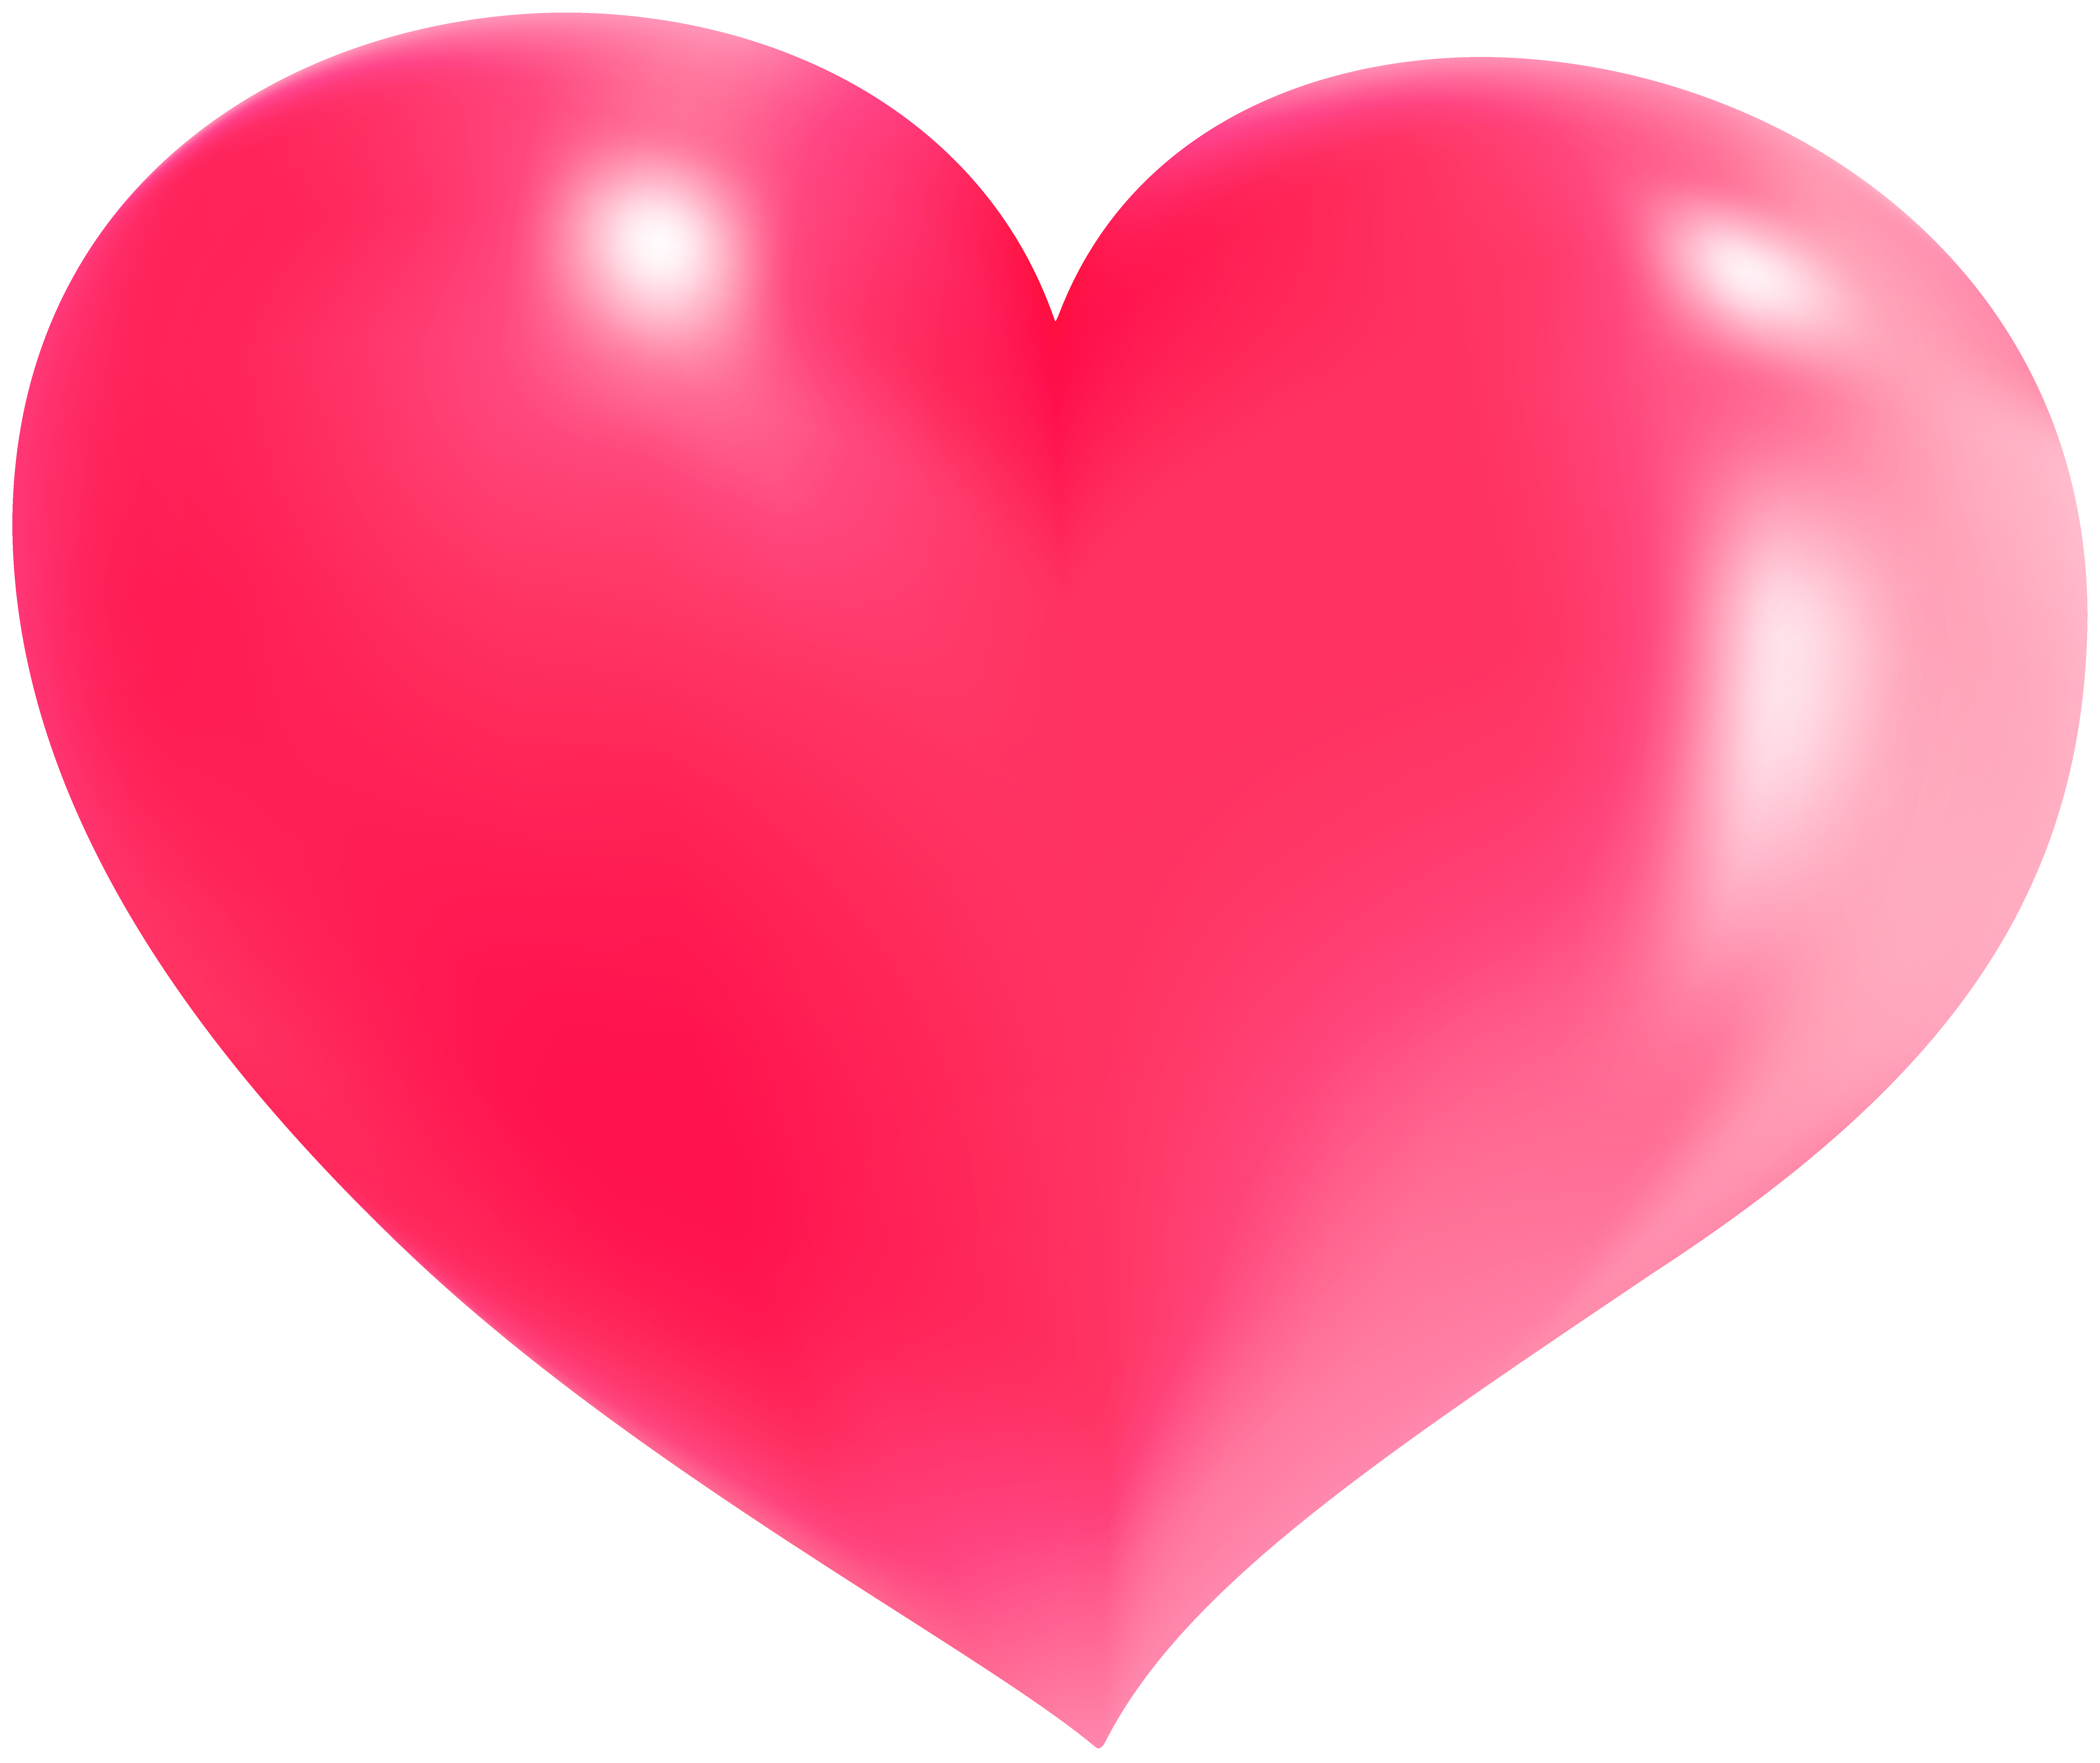 Cute Heart PNG Transparent Clipart​ | Gallery Yopriceville - High-Quality  Free Images and Transparent PNG Clipart